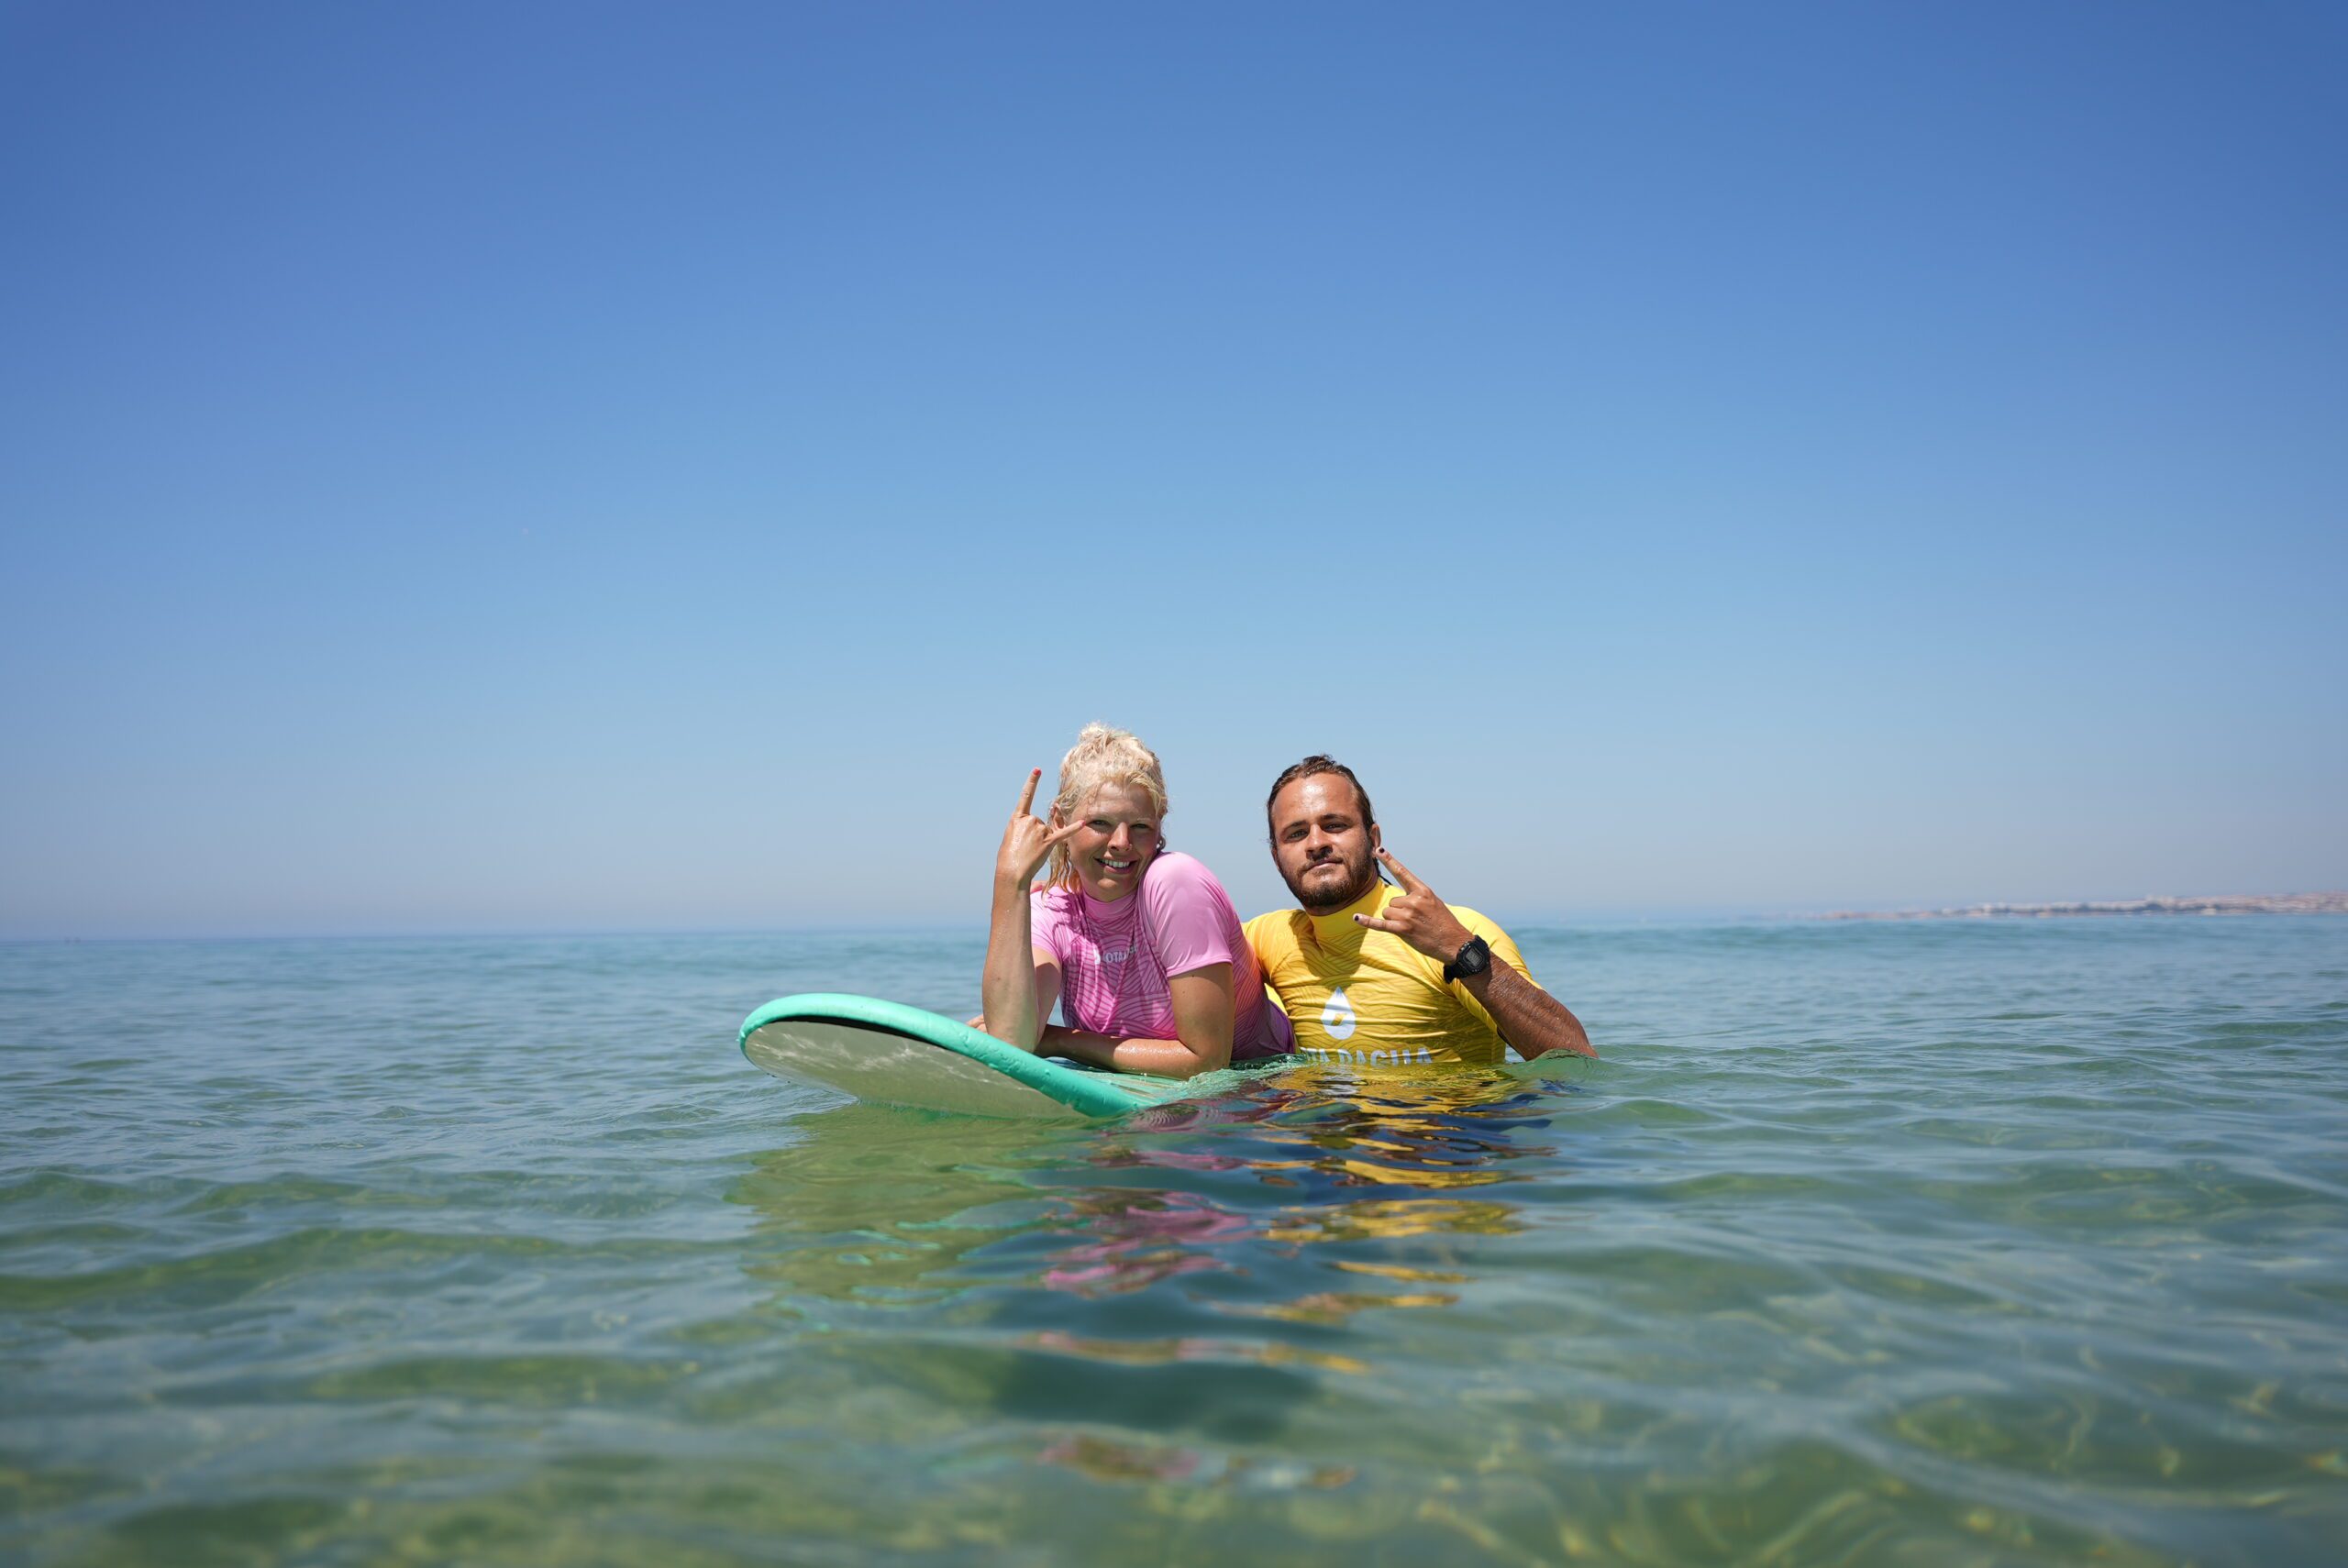 A surfer girl smiling inside of the water in a surf camp